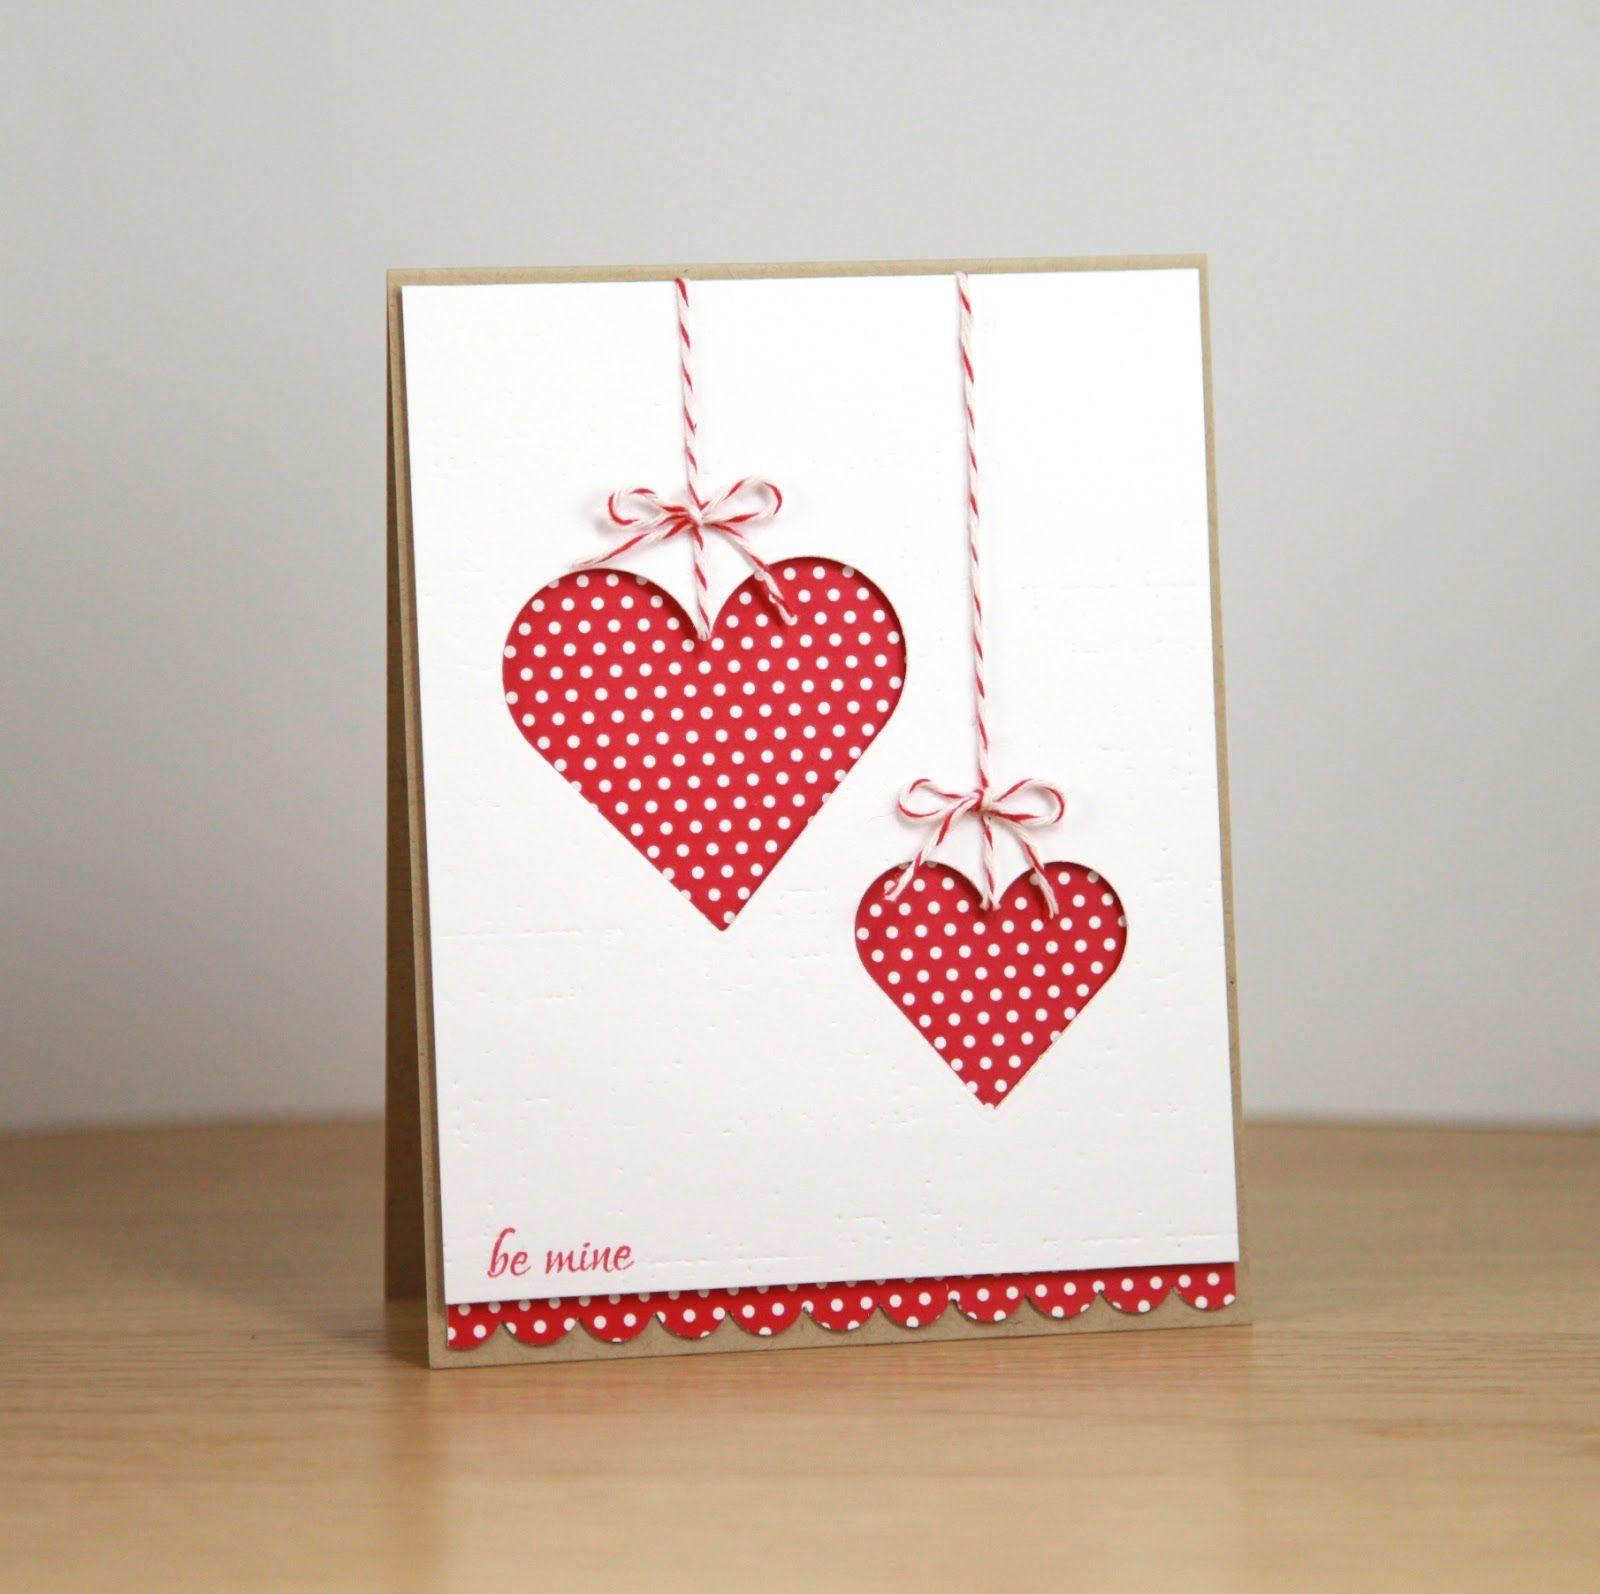 Cute Valentines Day Card Ideas
 Managed to whip up this little card today after being